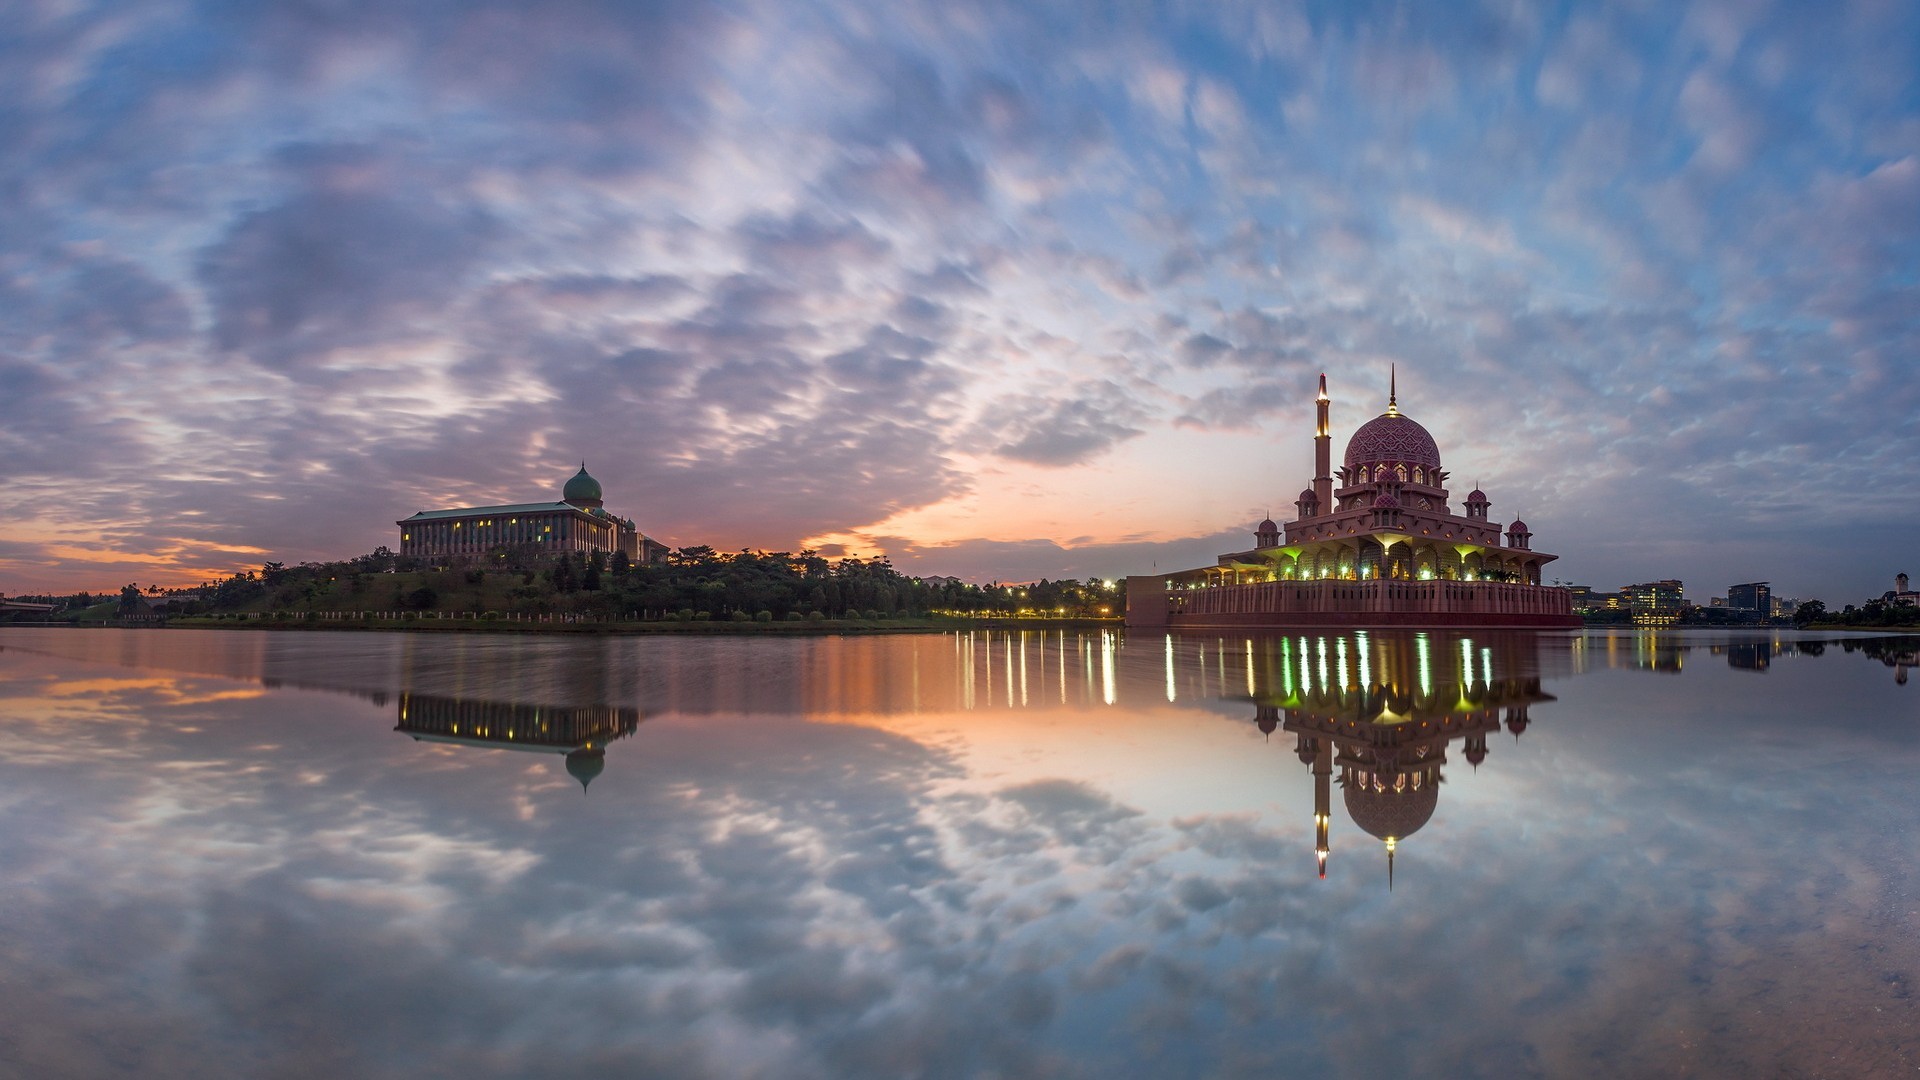 General 1920x1080 architecture building water trees Malaysia Kuala Lumpur mosque lights sunset reflection long exposure Asia